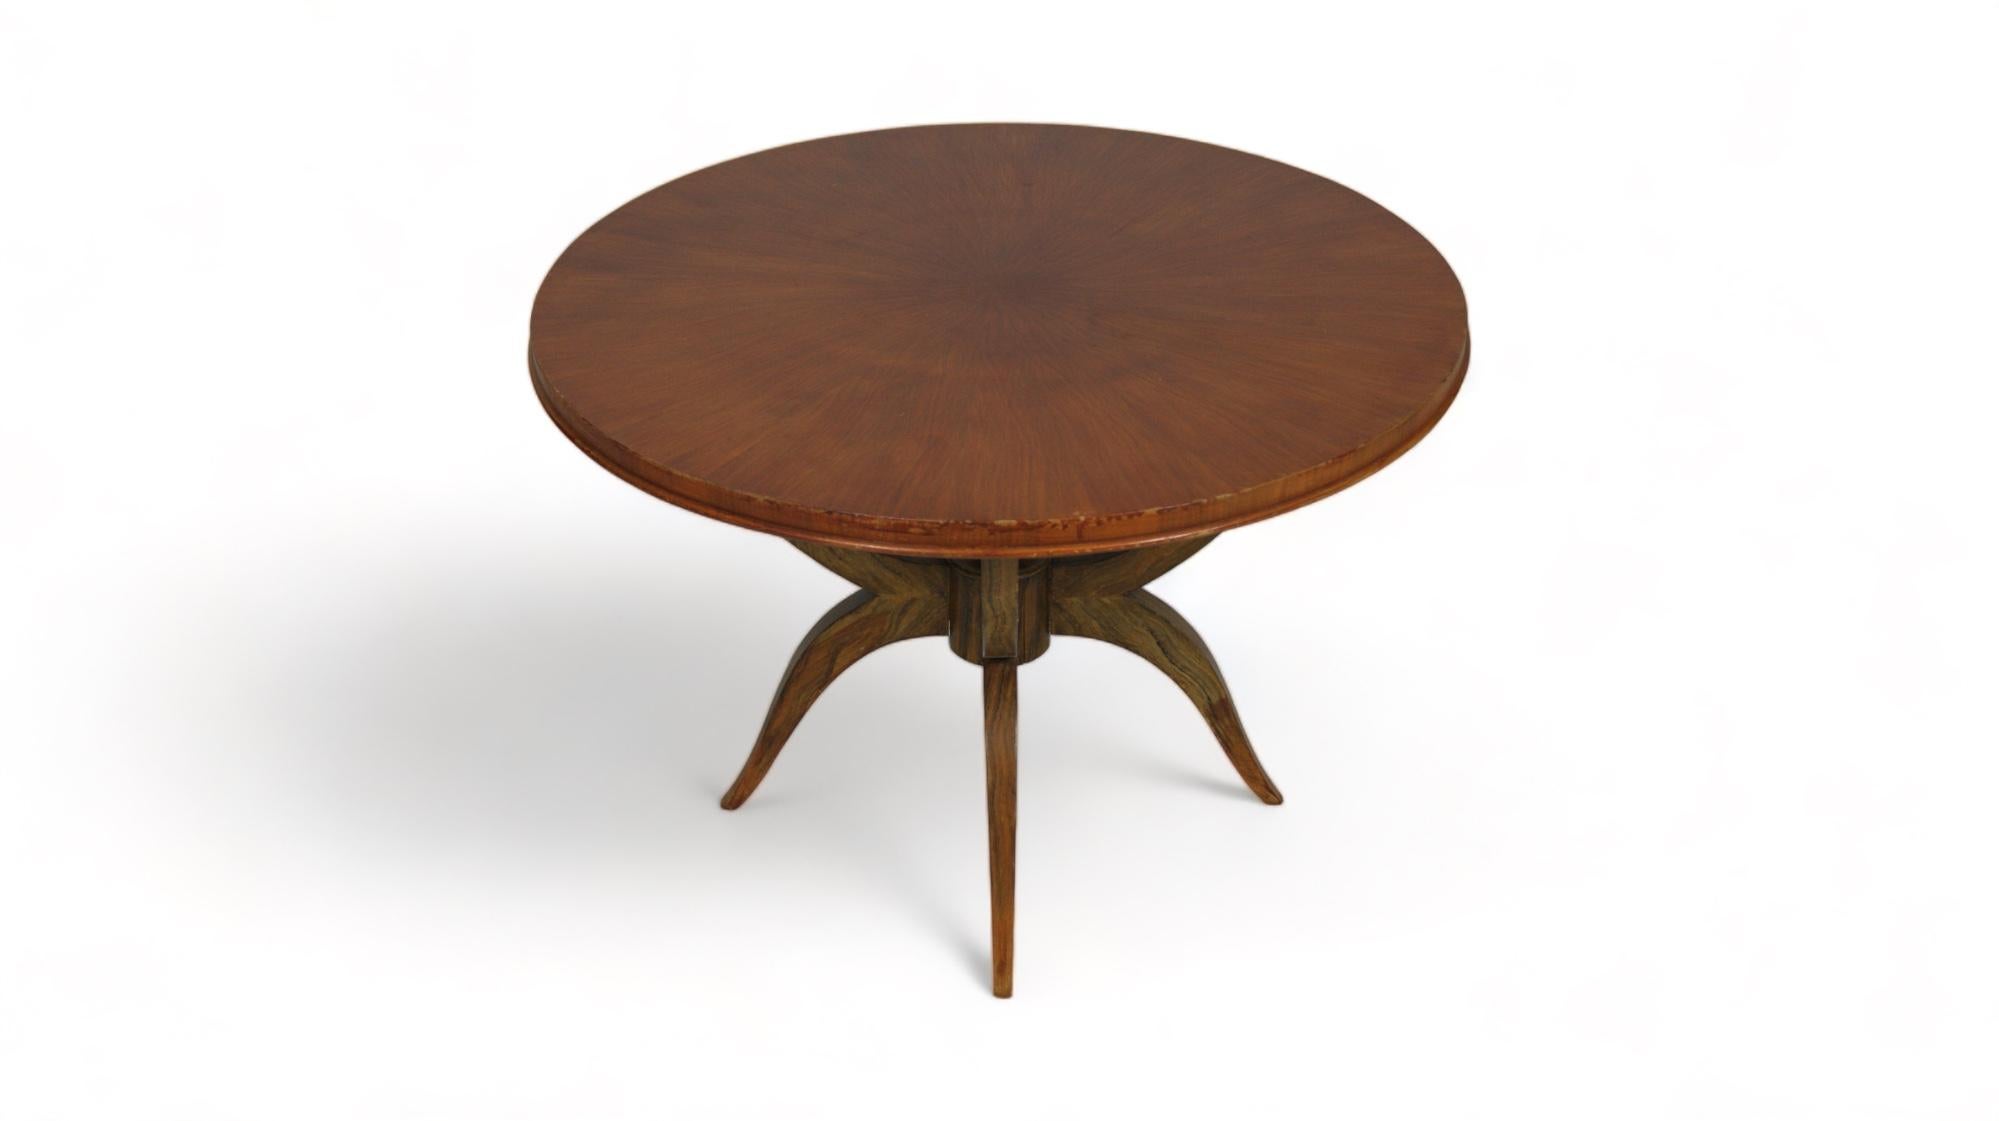 Welcome to the glamour and elegance of 1930s Art Deco encapsulated in this exquisite wooden pedestal side table, a true vintage gem that evokes the opulence and style of a bygone era.

With its Art Deco-inspired design, this side table exudes